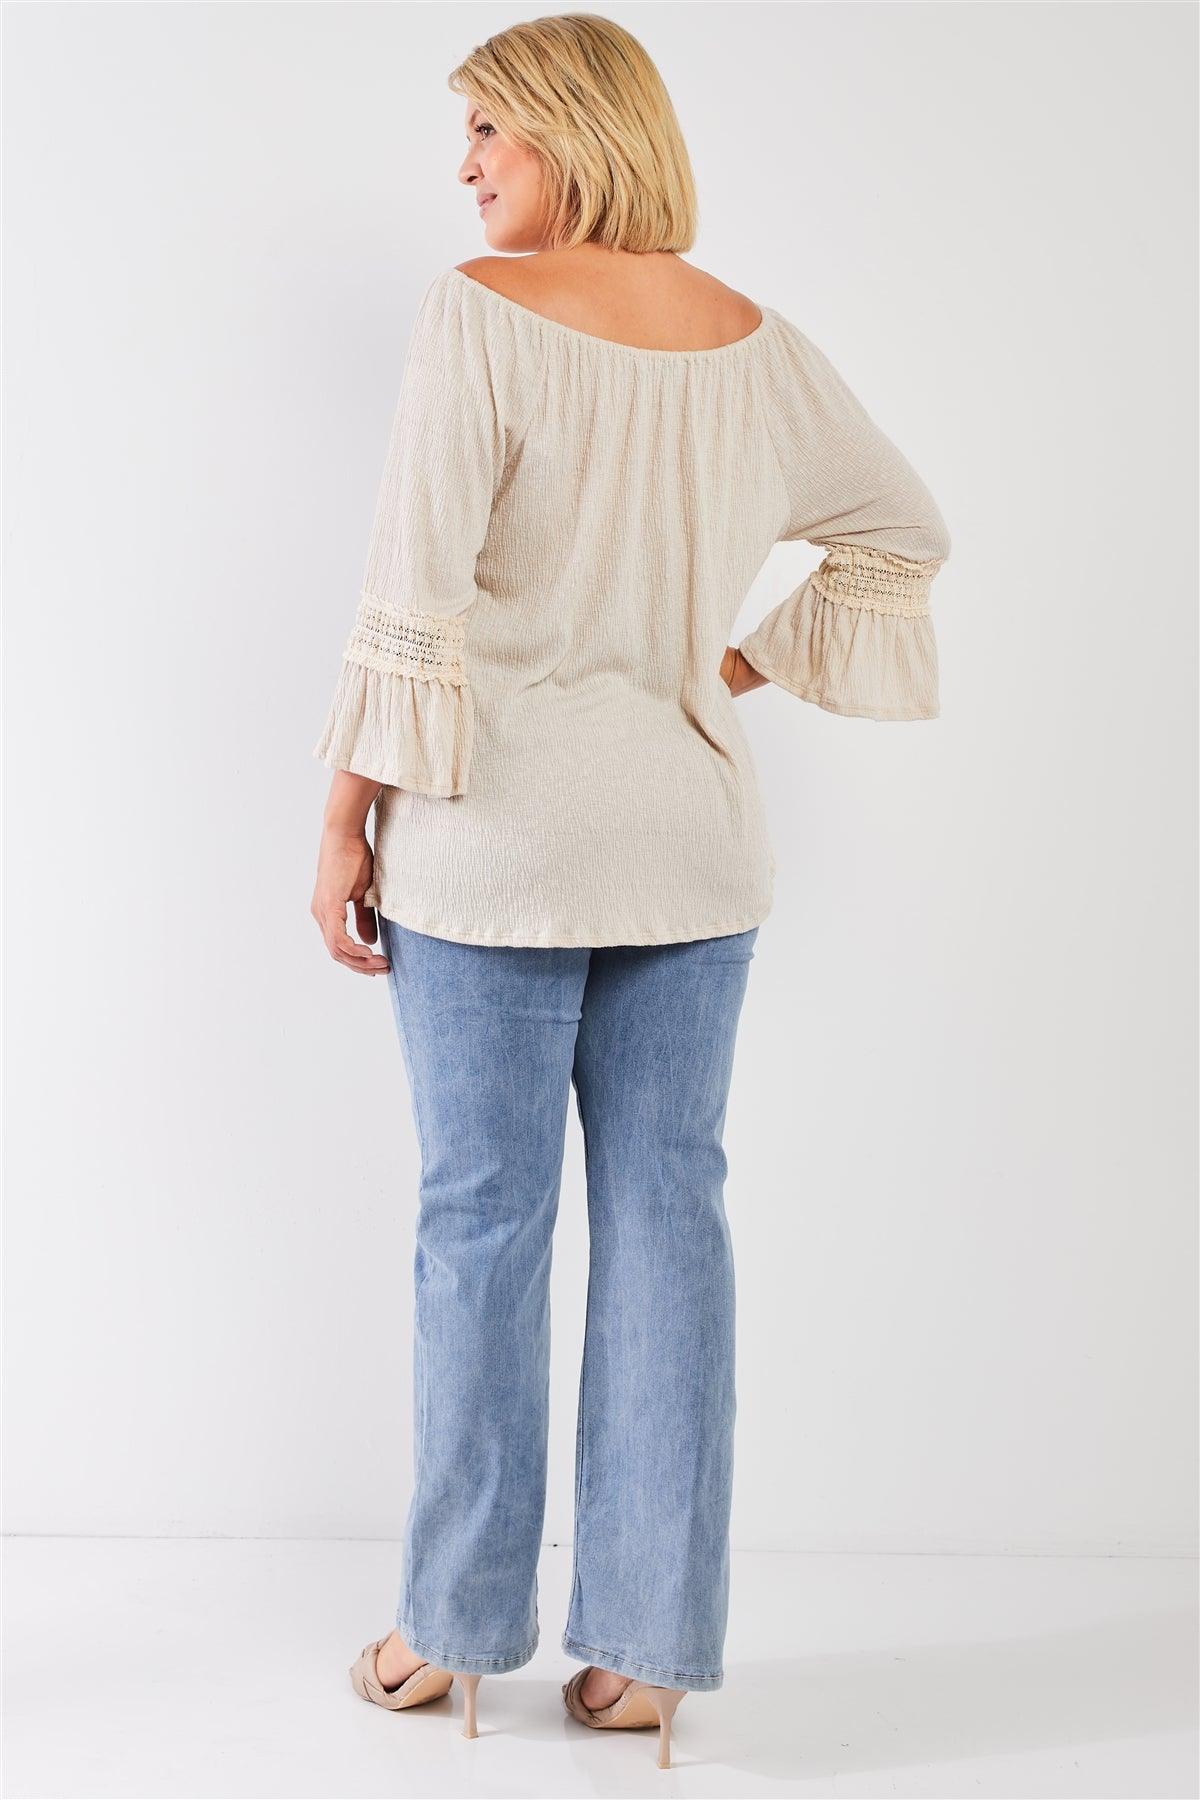 Junior Plus Boho Natural Beige Boat Neck 3/4 Flare Sleeve Embroidery Detail Top /3-2-1